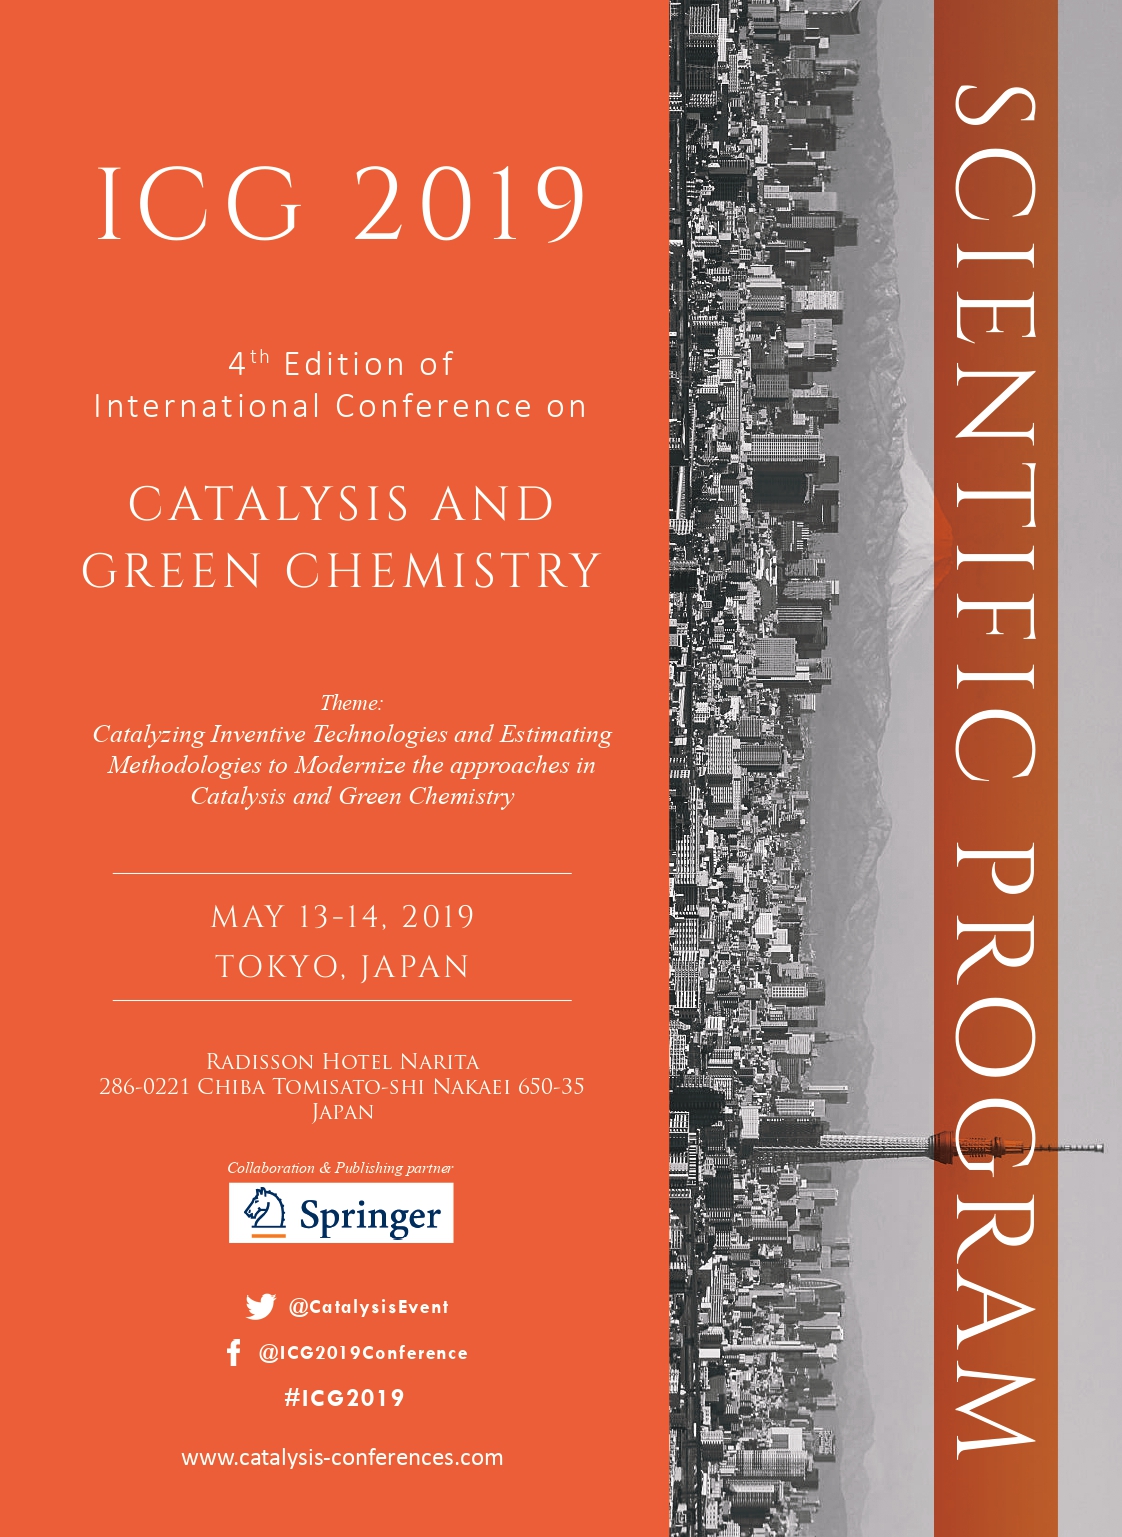 4th Edition of International Conference on  Catalysis and Green Chemistry | Tokyo, Japan Program